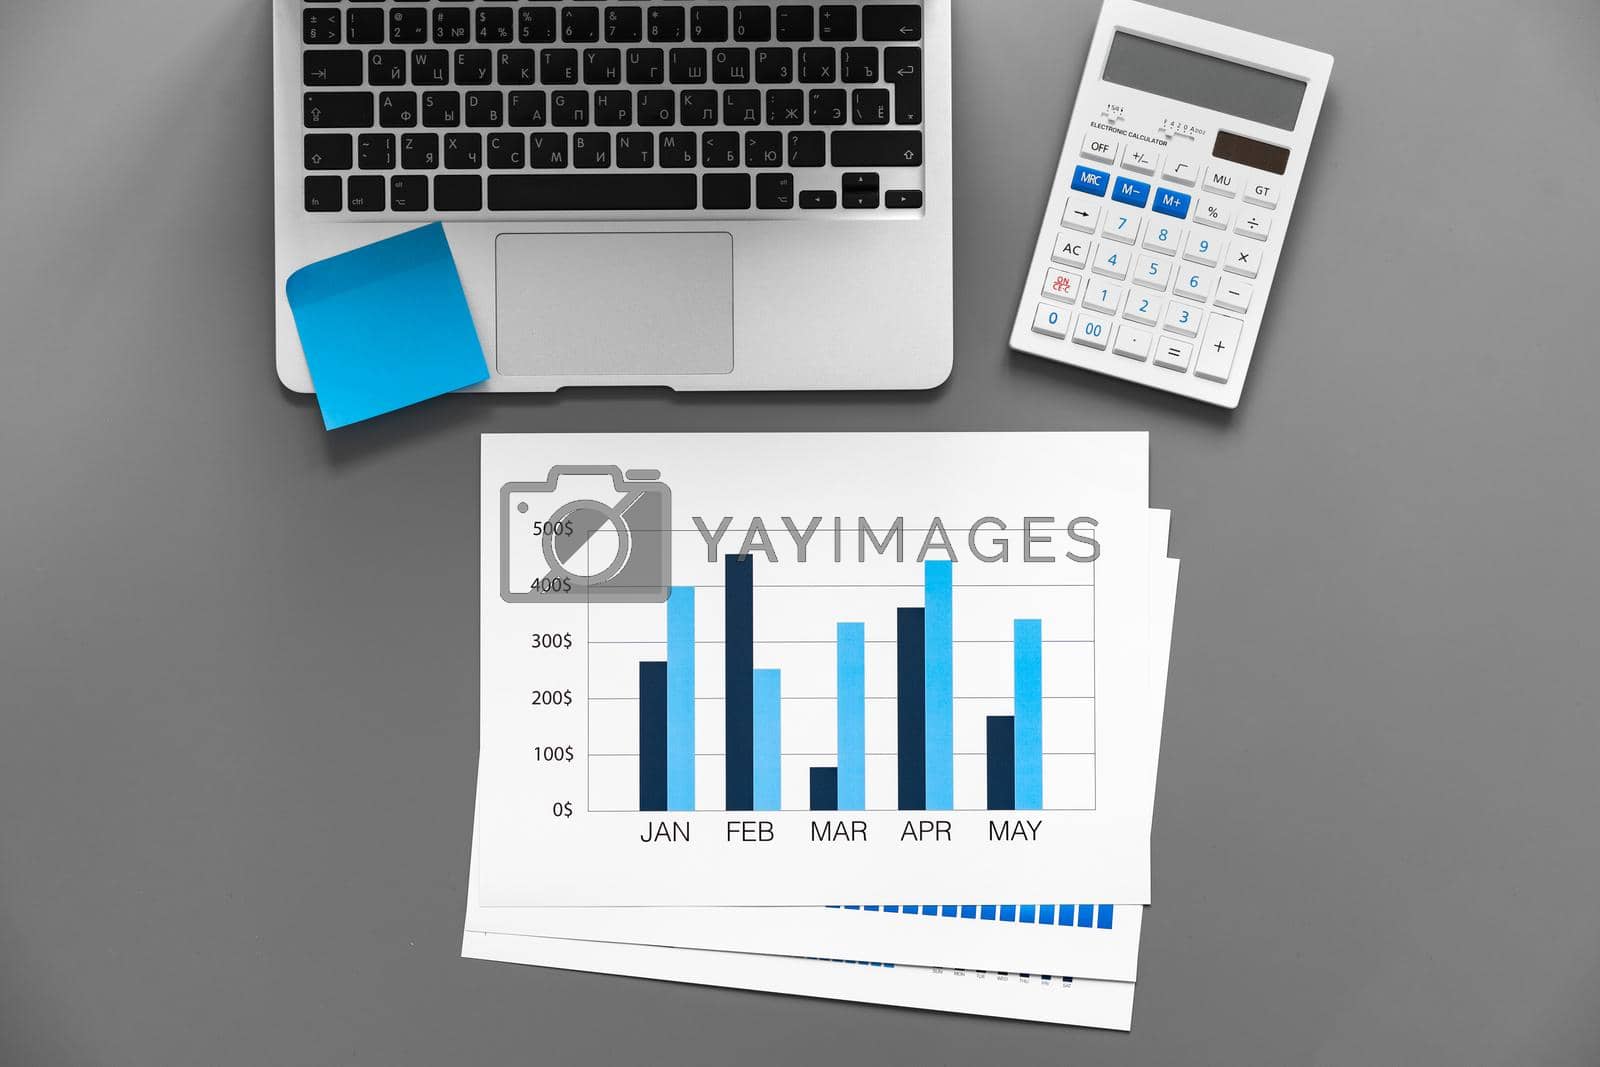 Royalty free image of Printed graphs and laptop on dark gray surface by Fabrikasimf